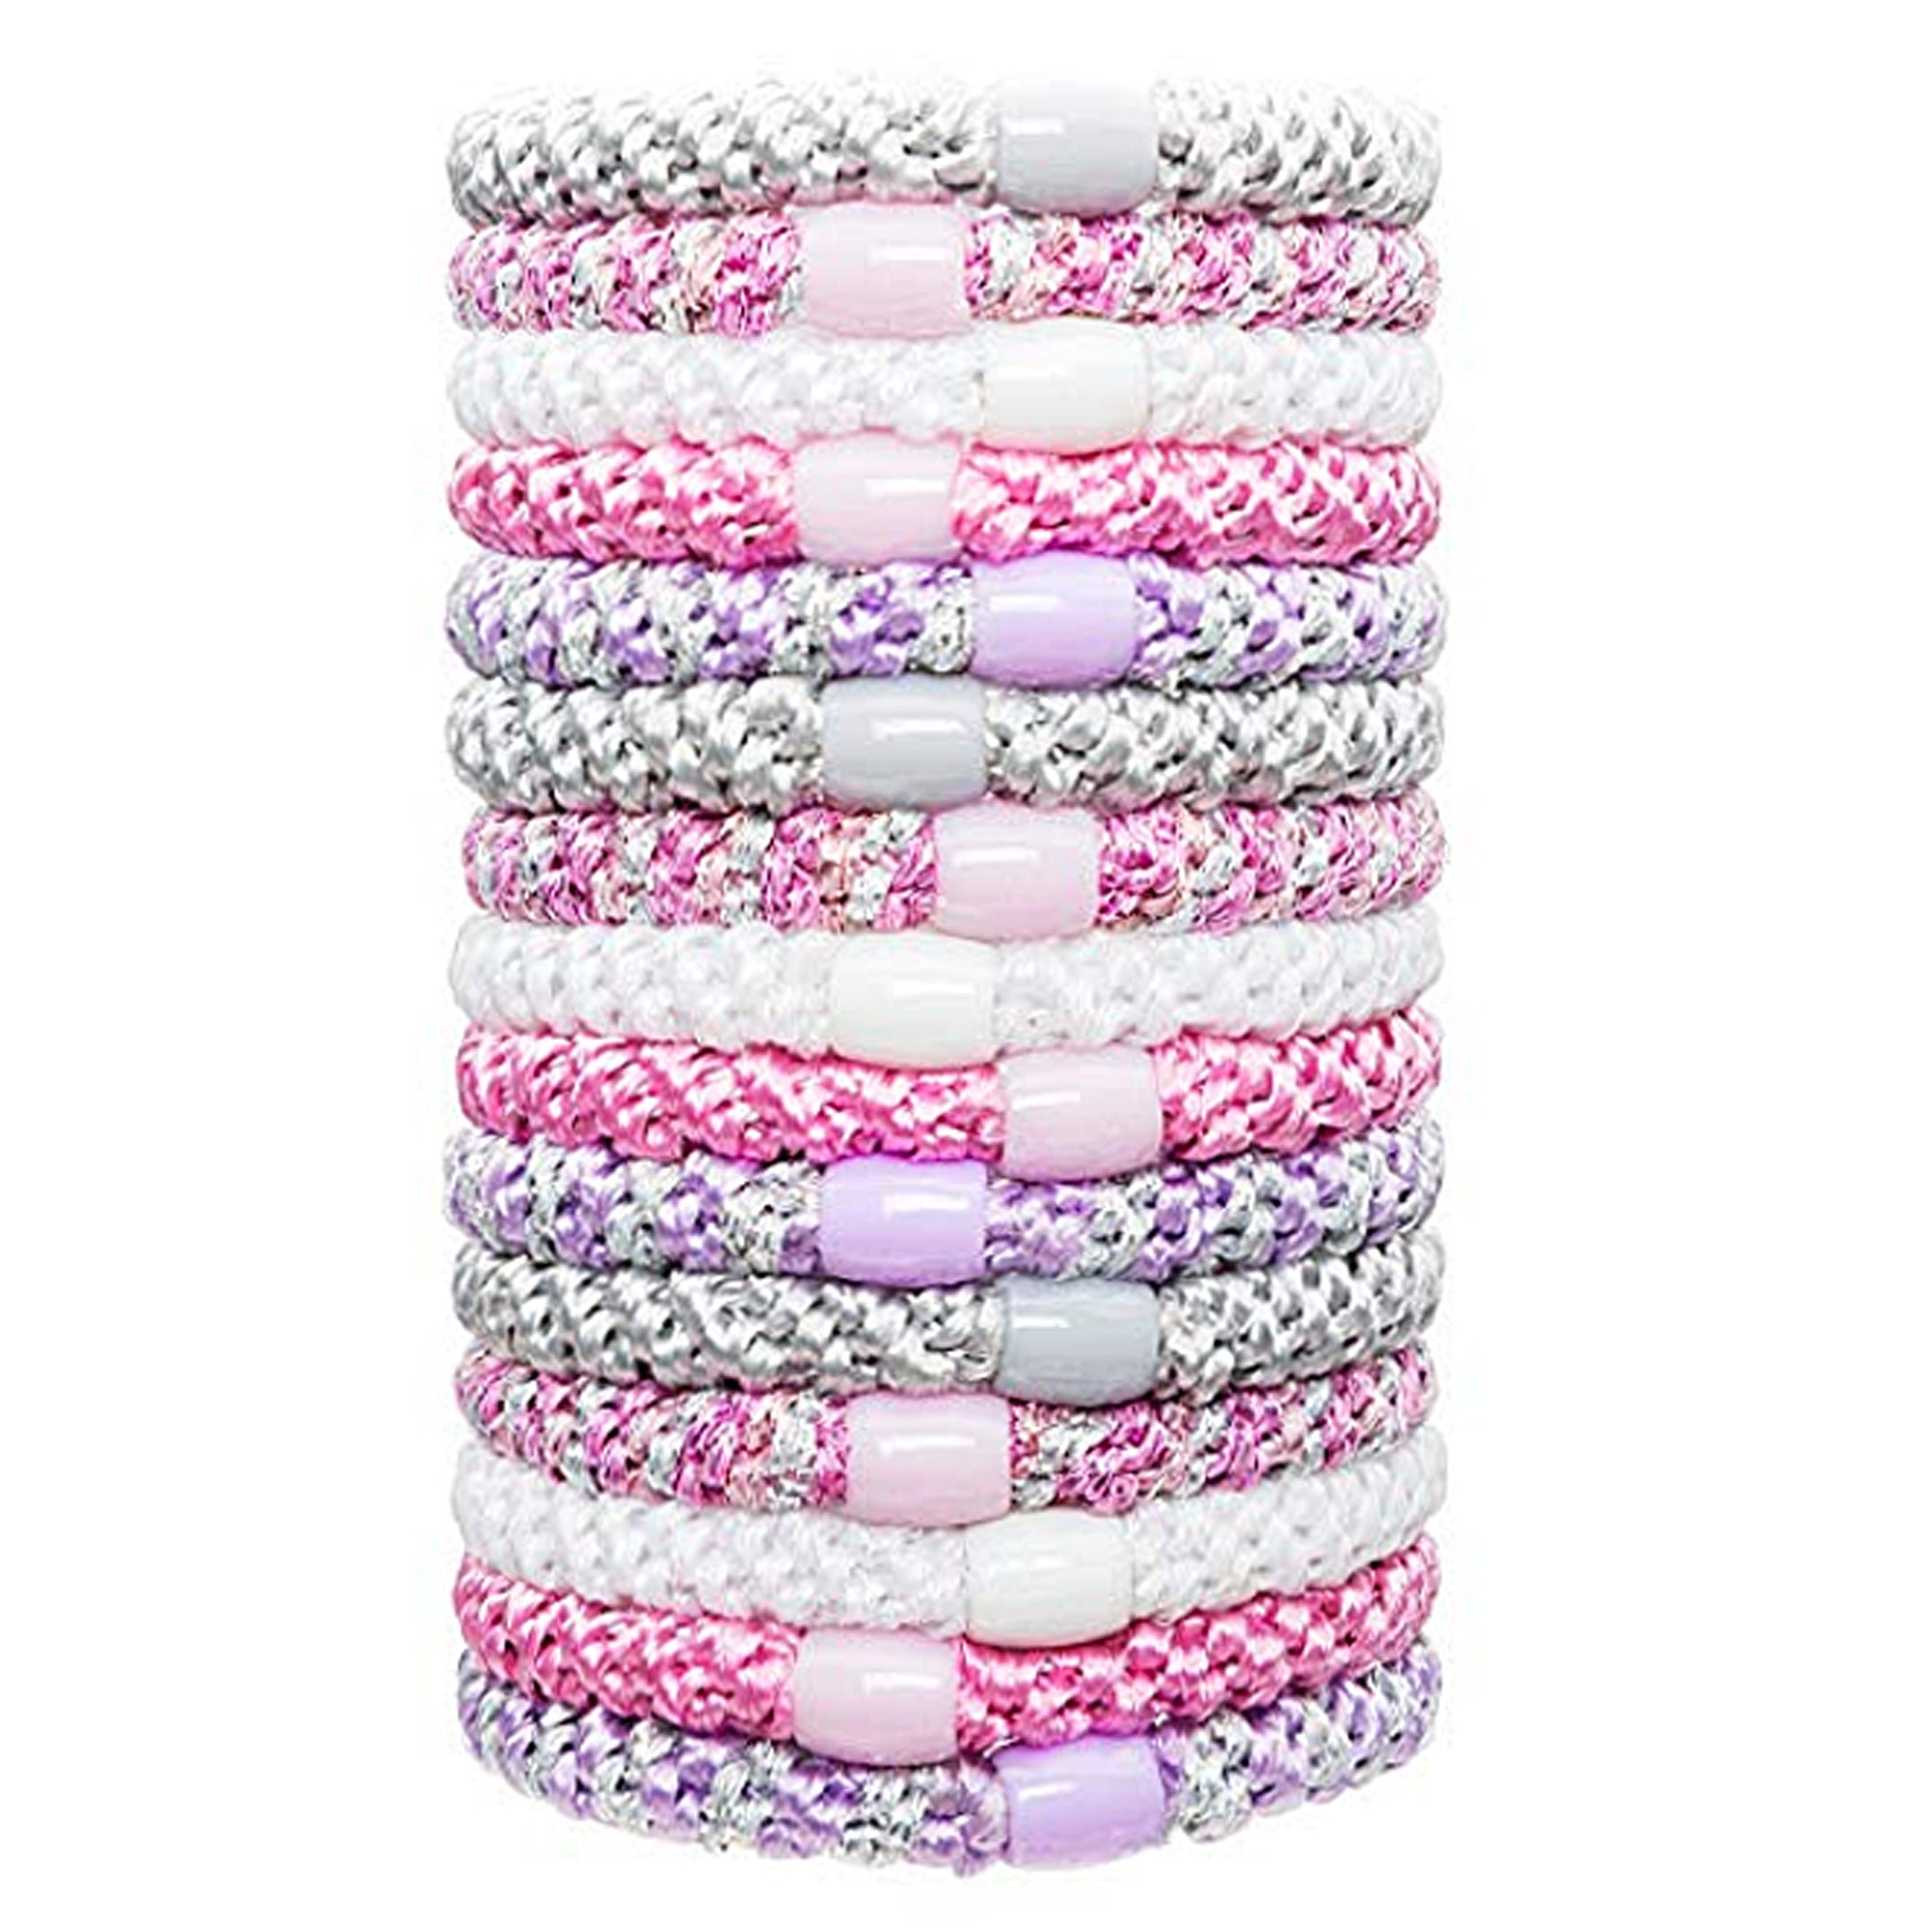 image of stacked L. Erickson Grab and Go Pony Tube Hair Ties in Princess 15 Pack